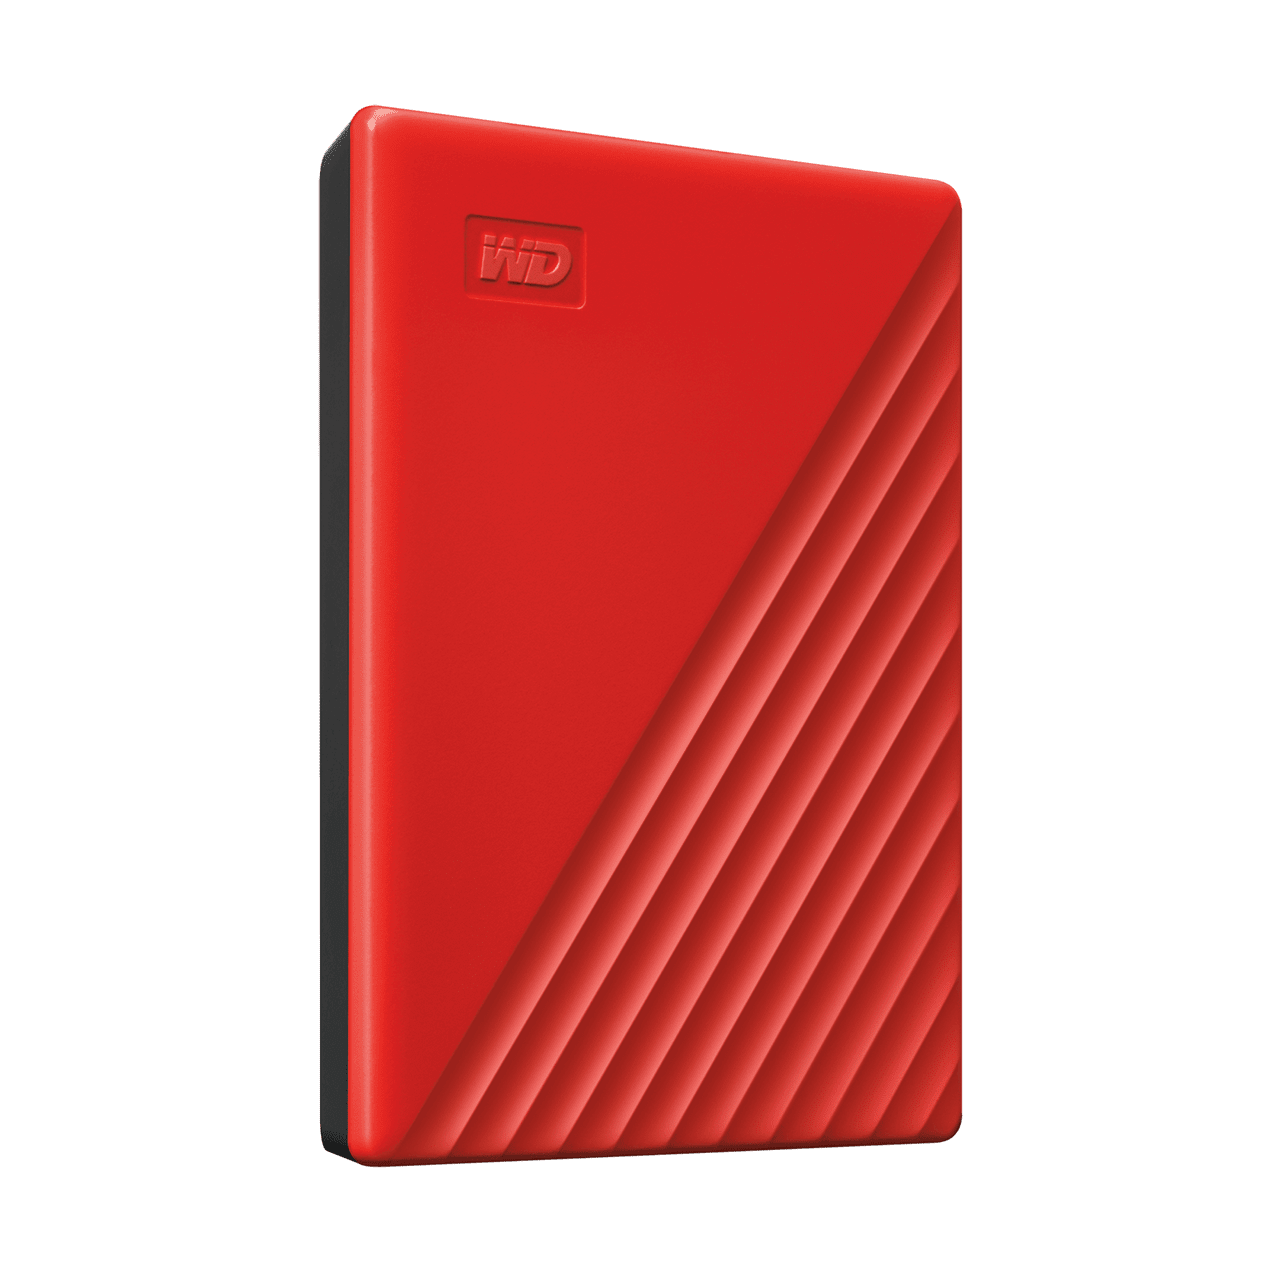 WD Western Digital My Passport  5TB ( RED ) Slim Portable External Hard Disk USB 3.0 With WD Backup Software & Password Protection